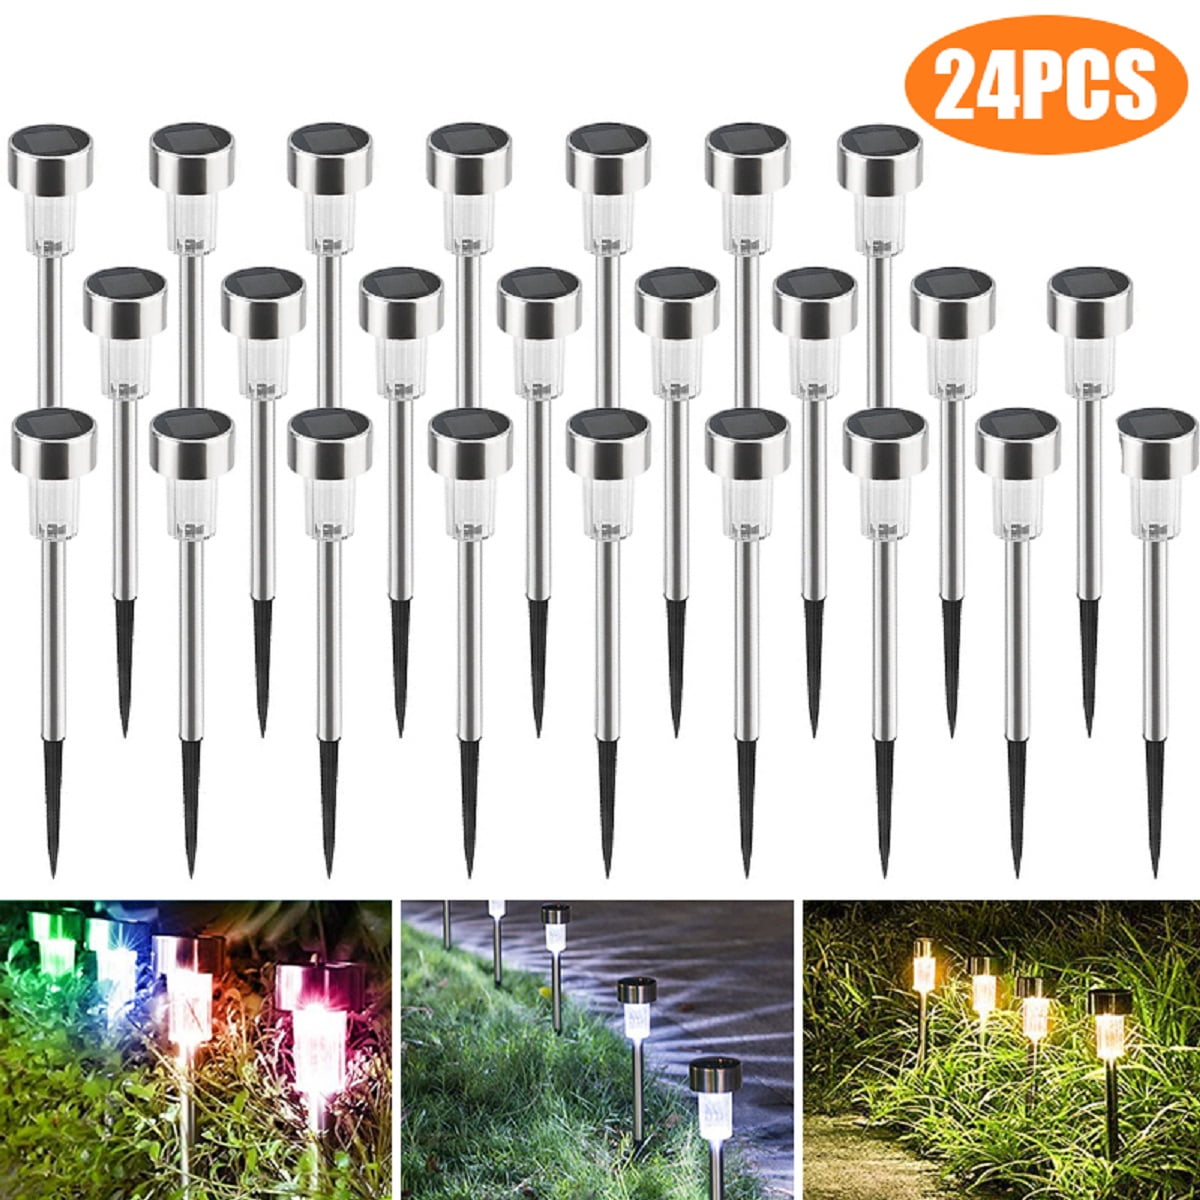 24 Outdoor Stainless Steel Solar LED Bright White Landscape Path Light Yard Post 